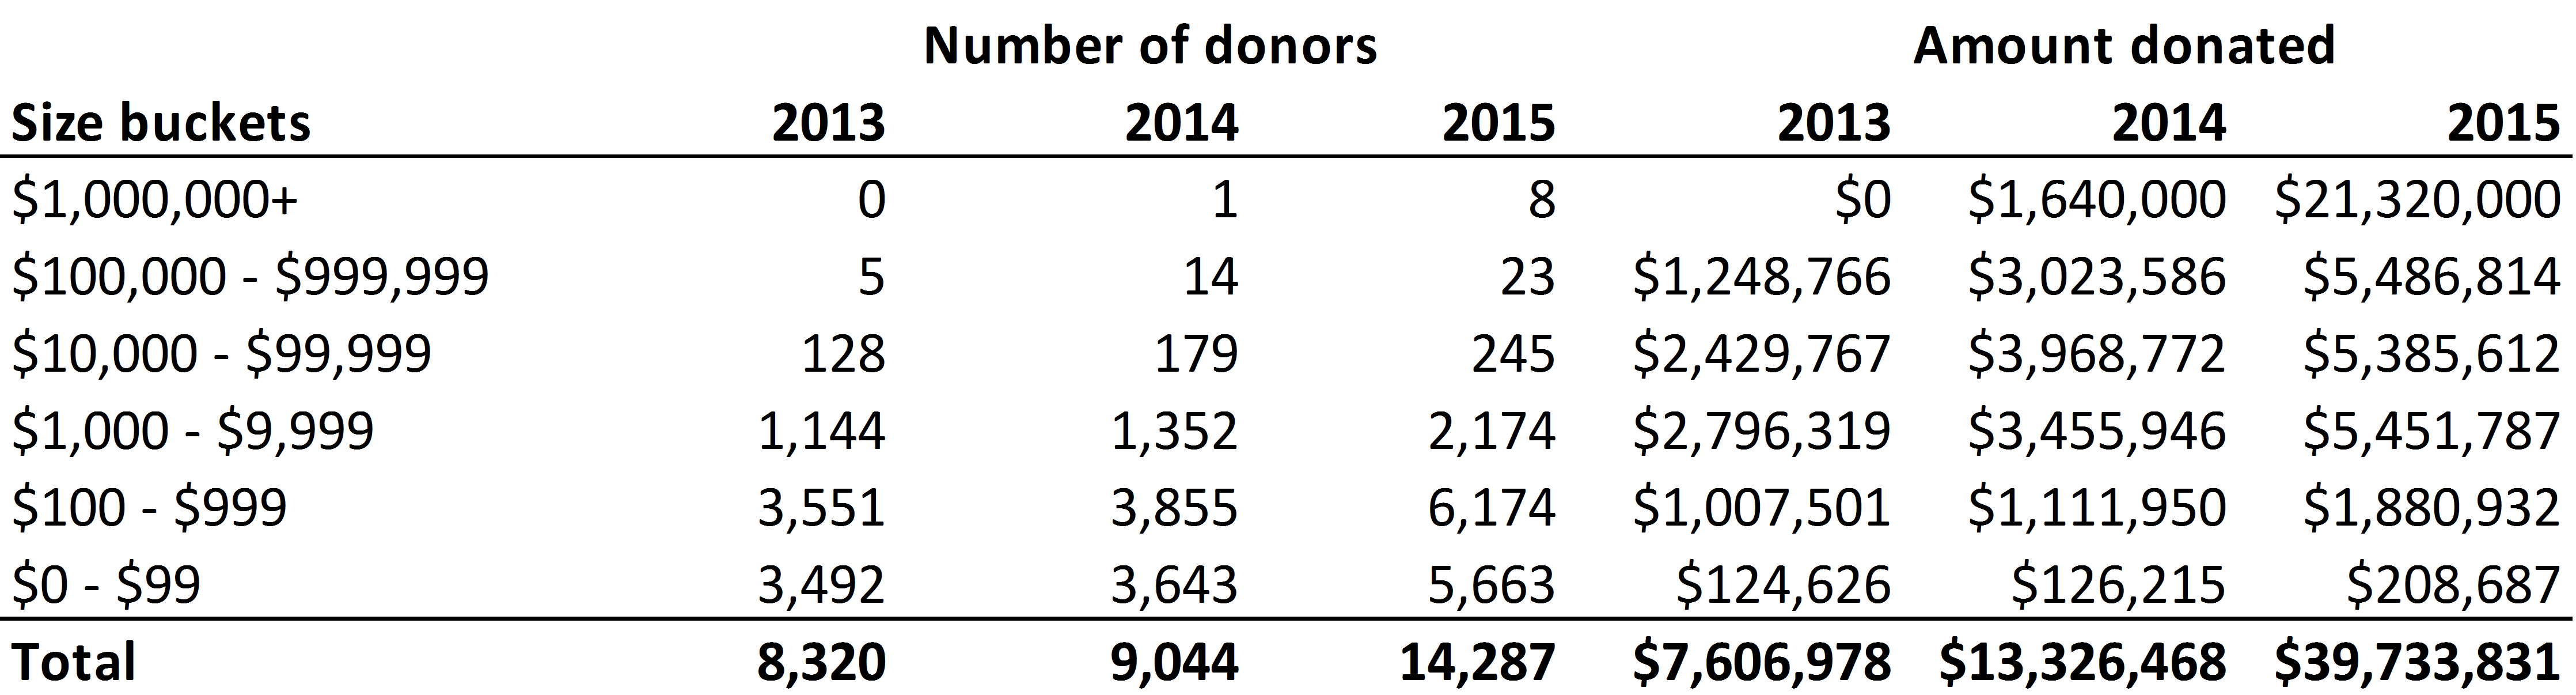 GiveWell money moved by donor size (2015)